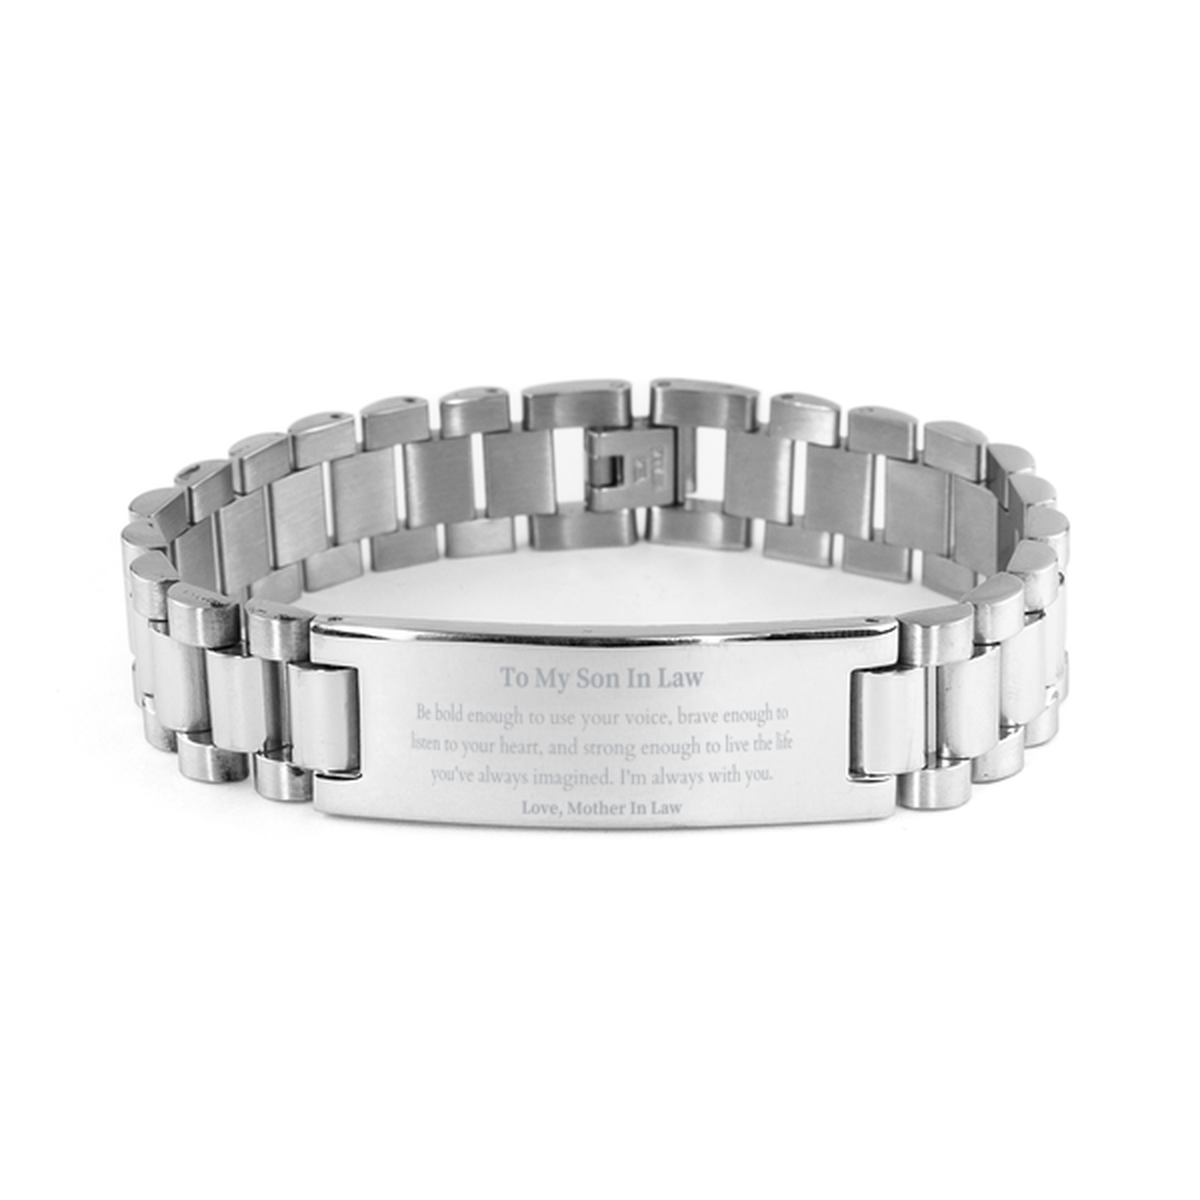 Keepsake Son In Law Ladder Stainless Steel Bracelet Gift Idea Graduation Christmas Birthday Son In Law from Mother In Law, Son In Law Be bold enough to use your voice, brave enough to listen to your heart. Love, Mother In Law